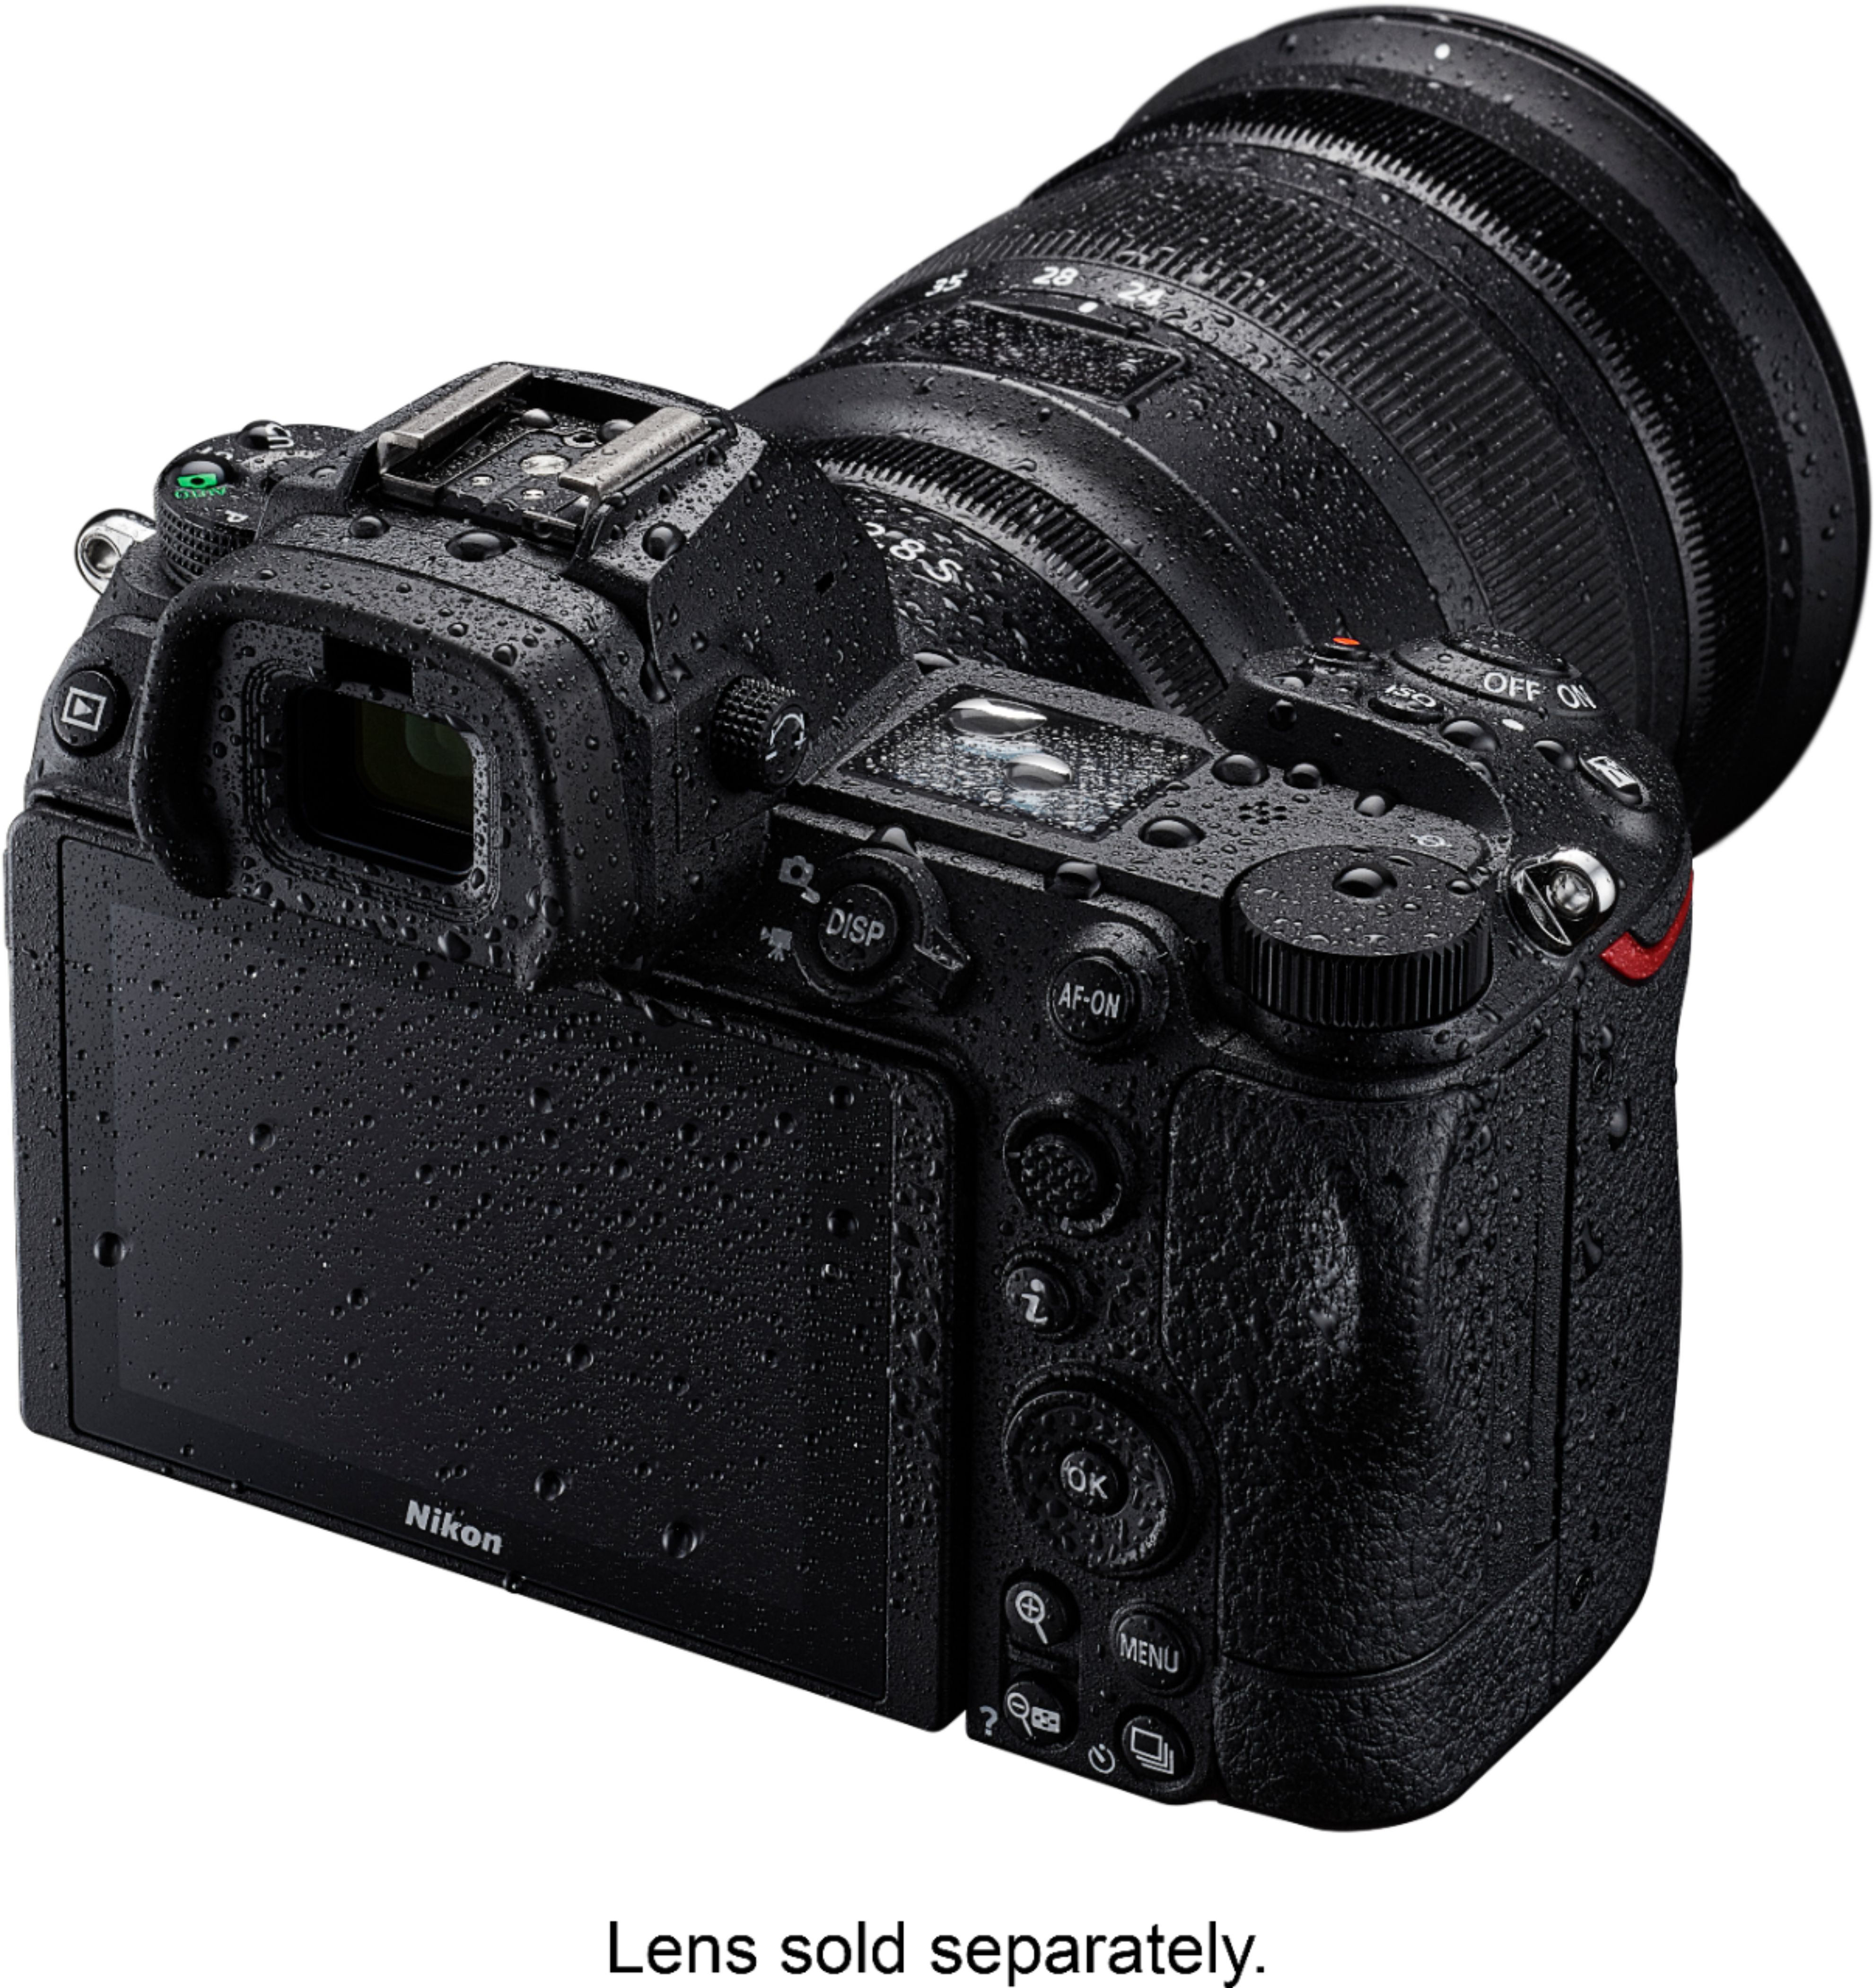 Angle View: Canon - EOS Rebel SL3 DSLR 4K Video Camera with EF-S 18-55mm IS STM Lens